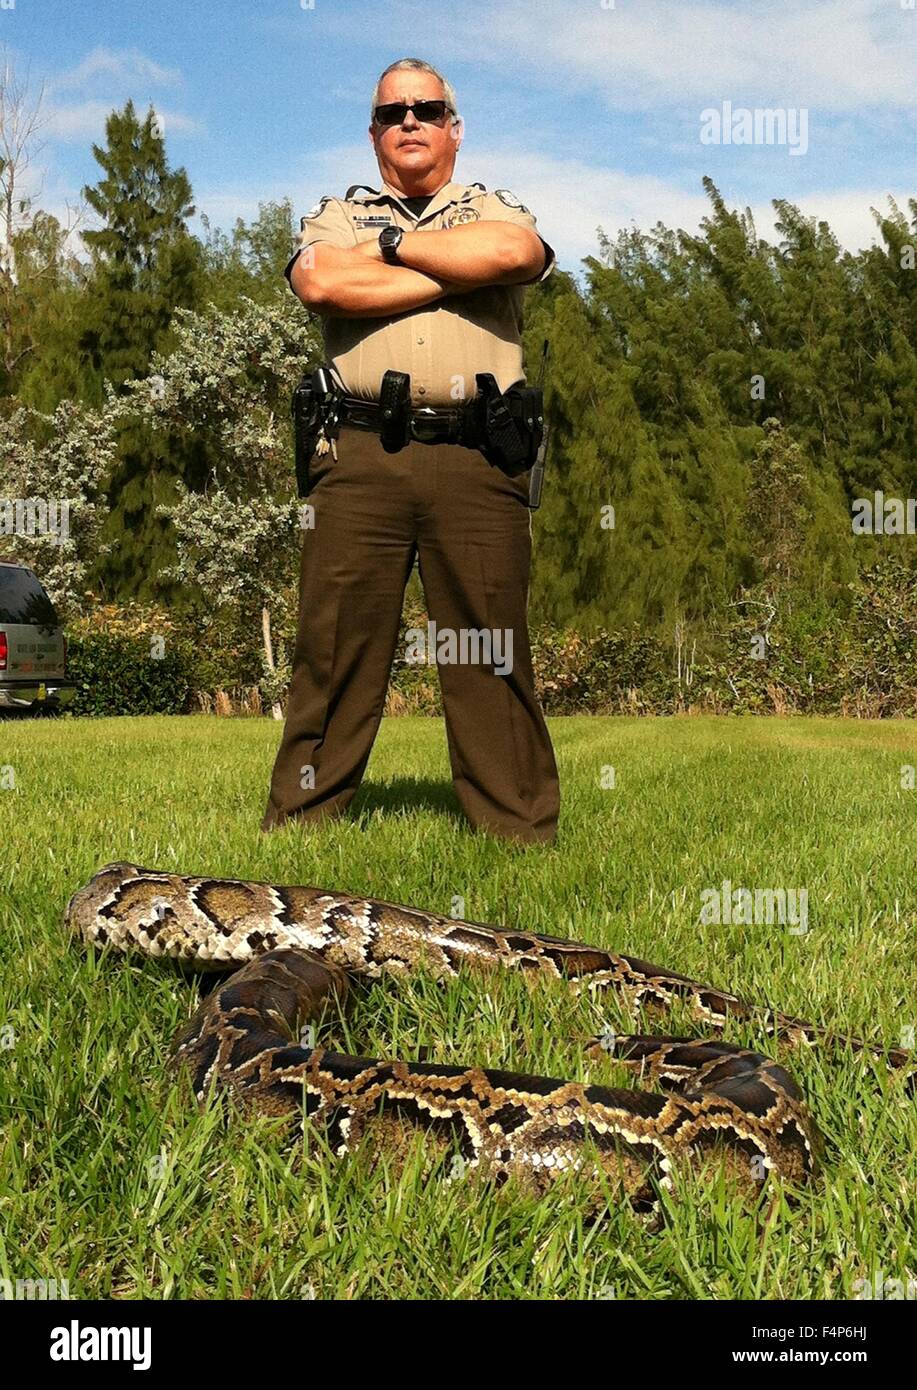 Florida Wildlife Control Officer Jorge Pino poses with a captured Burmese python in the Everglades National Park January 11, 2013 near Homestead, Florida. The python is an invasive species introduced by accident and now competing directly with the top predators in the Everglades ecosystem. Stock Photo